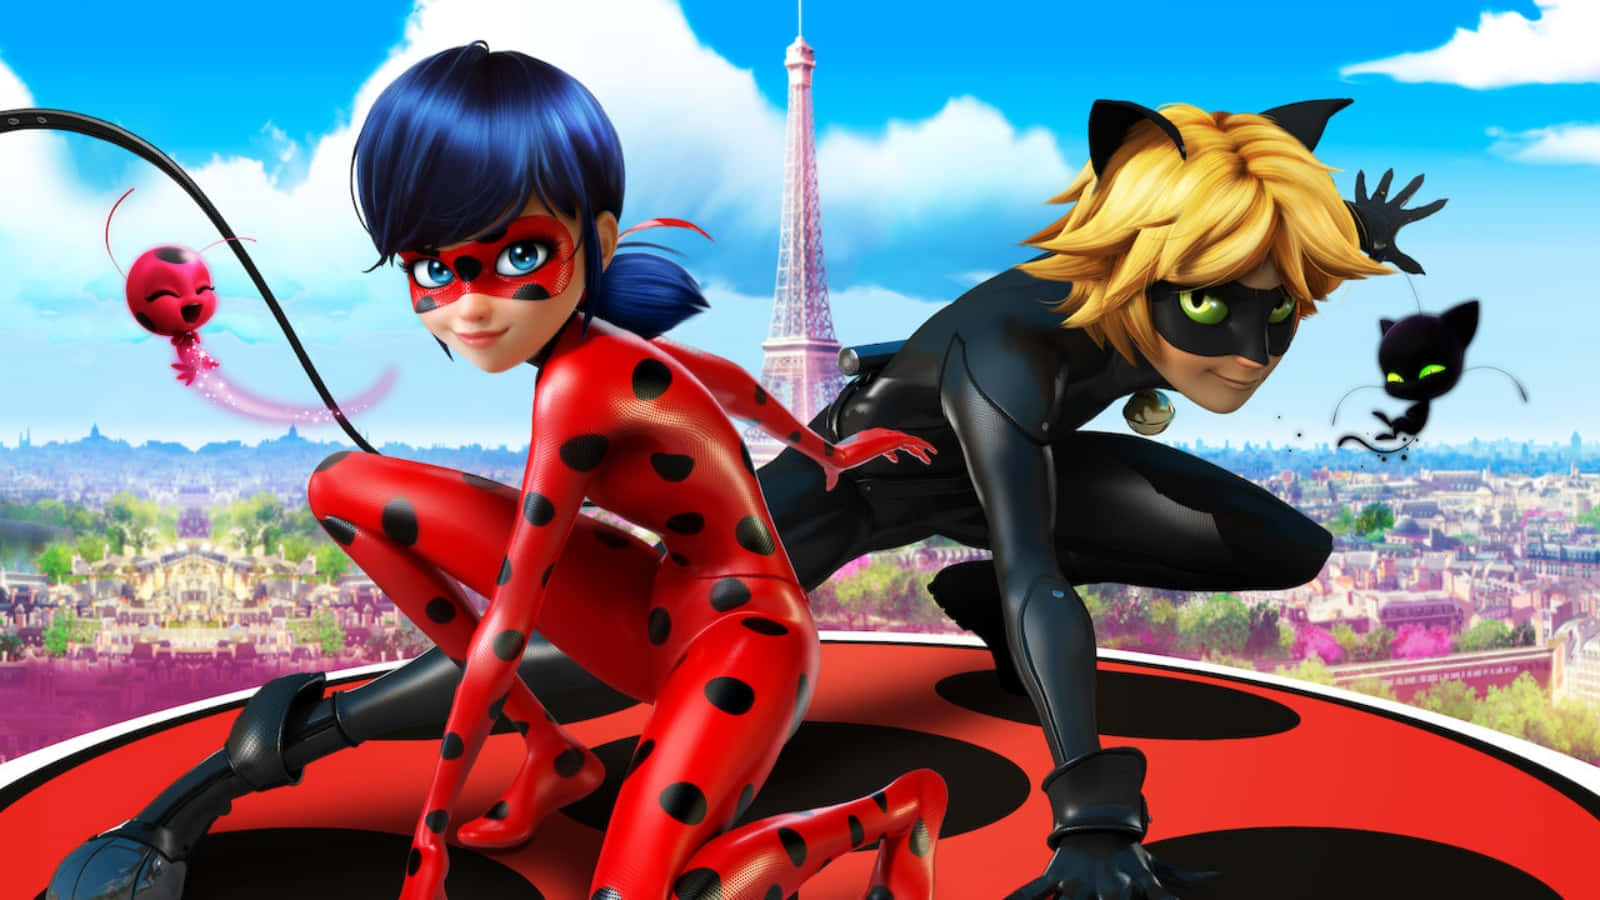 Enjoy the beauty of Paris with Marinette and Adrien in Miraculous!